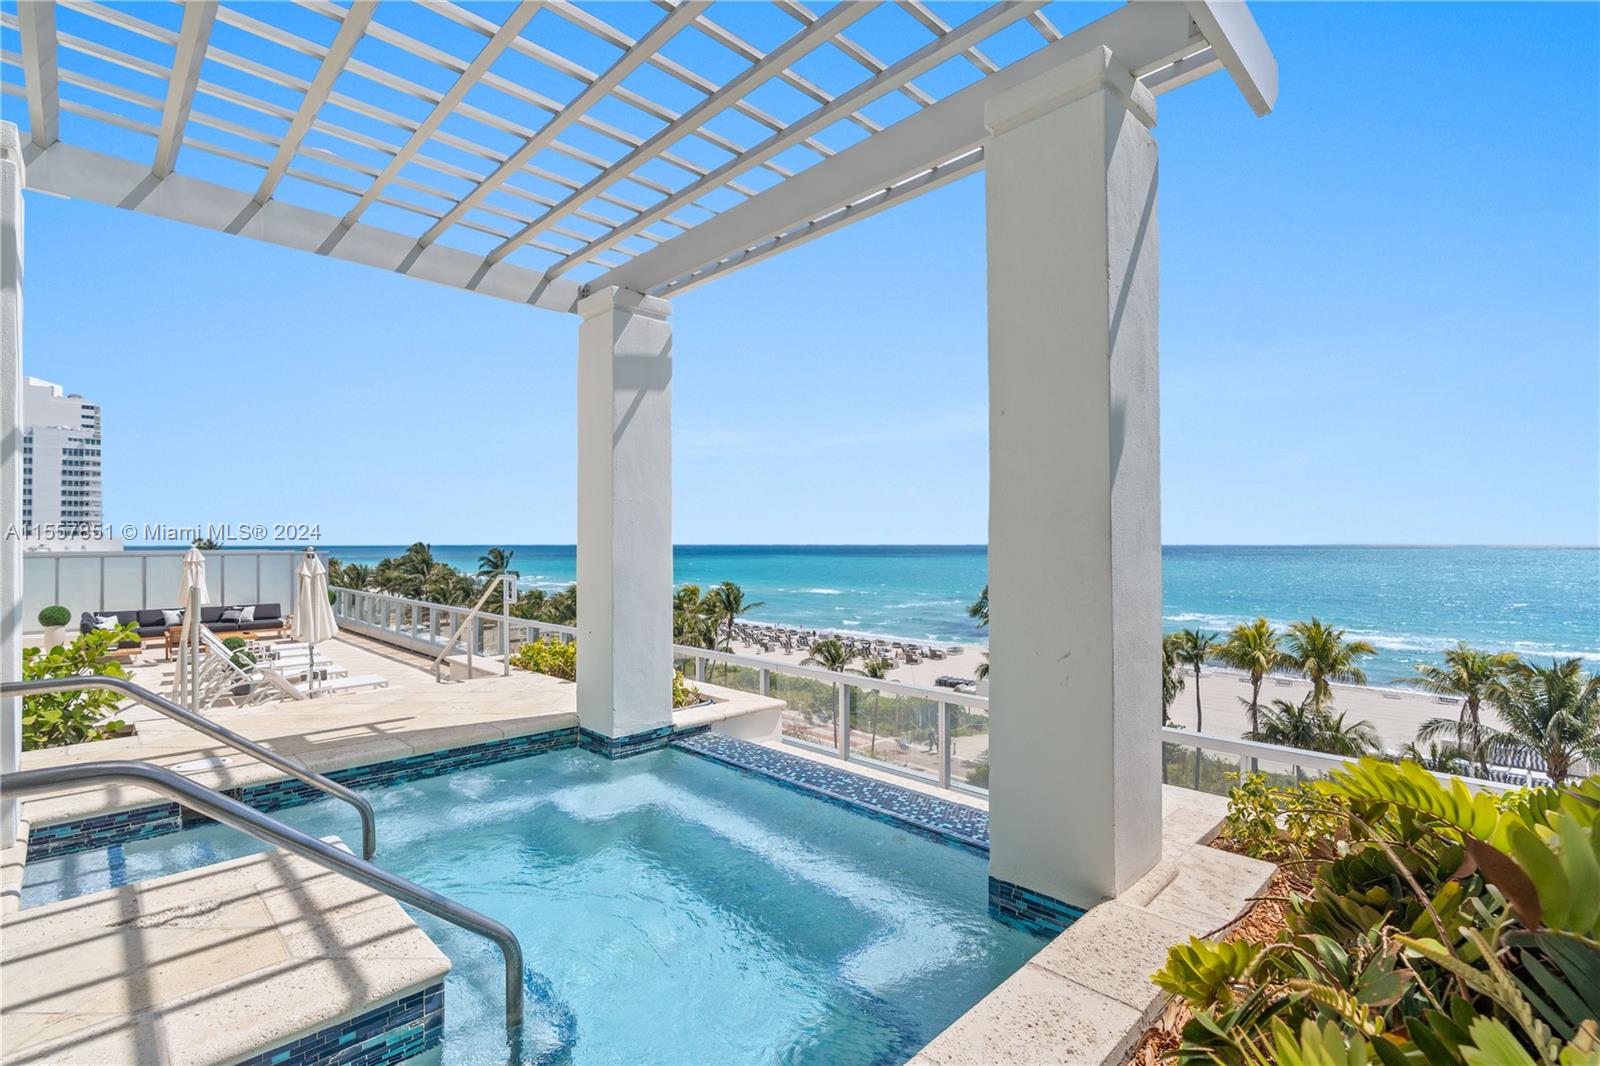 Embrace luxury living at the prestigious Fontainebleau resort in this oceanfront, furnished/turnkey 5BD/6.5BA 2 story residence. This home features magnificent living areas with volume ceilings, direct ocean views, spa with steam room, large kitchen with ocean view and luxurious oceanfront suites, creating an unparalleled living space. This truly unique property boasts an immense oceanfront terrace enhanced with private pool and oceanfront hot tub, perfect for entertaining. Enroll in hotel rental program & receive income while away. The Fontainebleau offers luxury amenities on 22 oceanfront acres including award-winning restaurants, LIV night club, Lapis spa & state-of-the-art fitness center. Maintenance includes AC, local calls, electricity, valet + daily breakfast in the owners lounge.